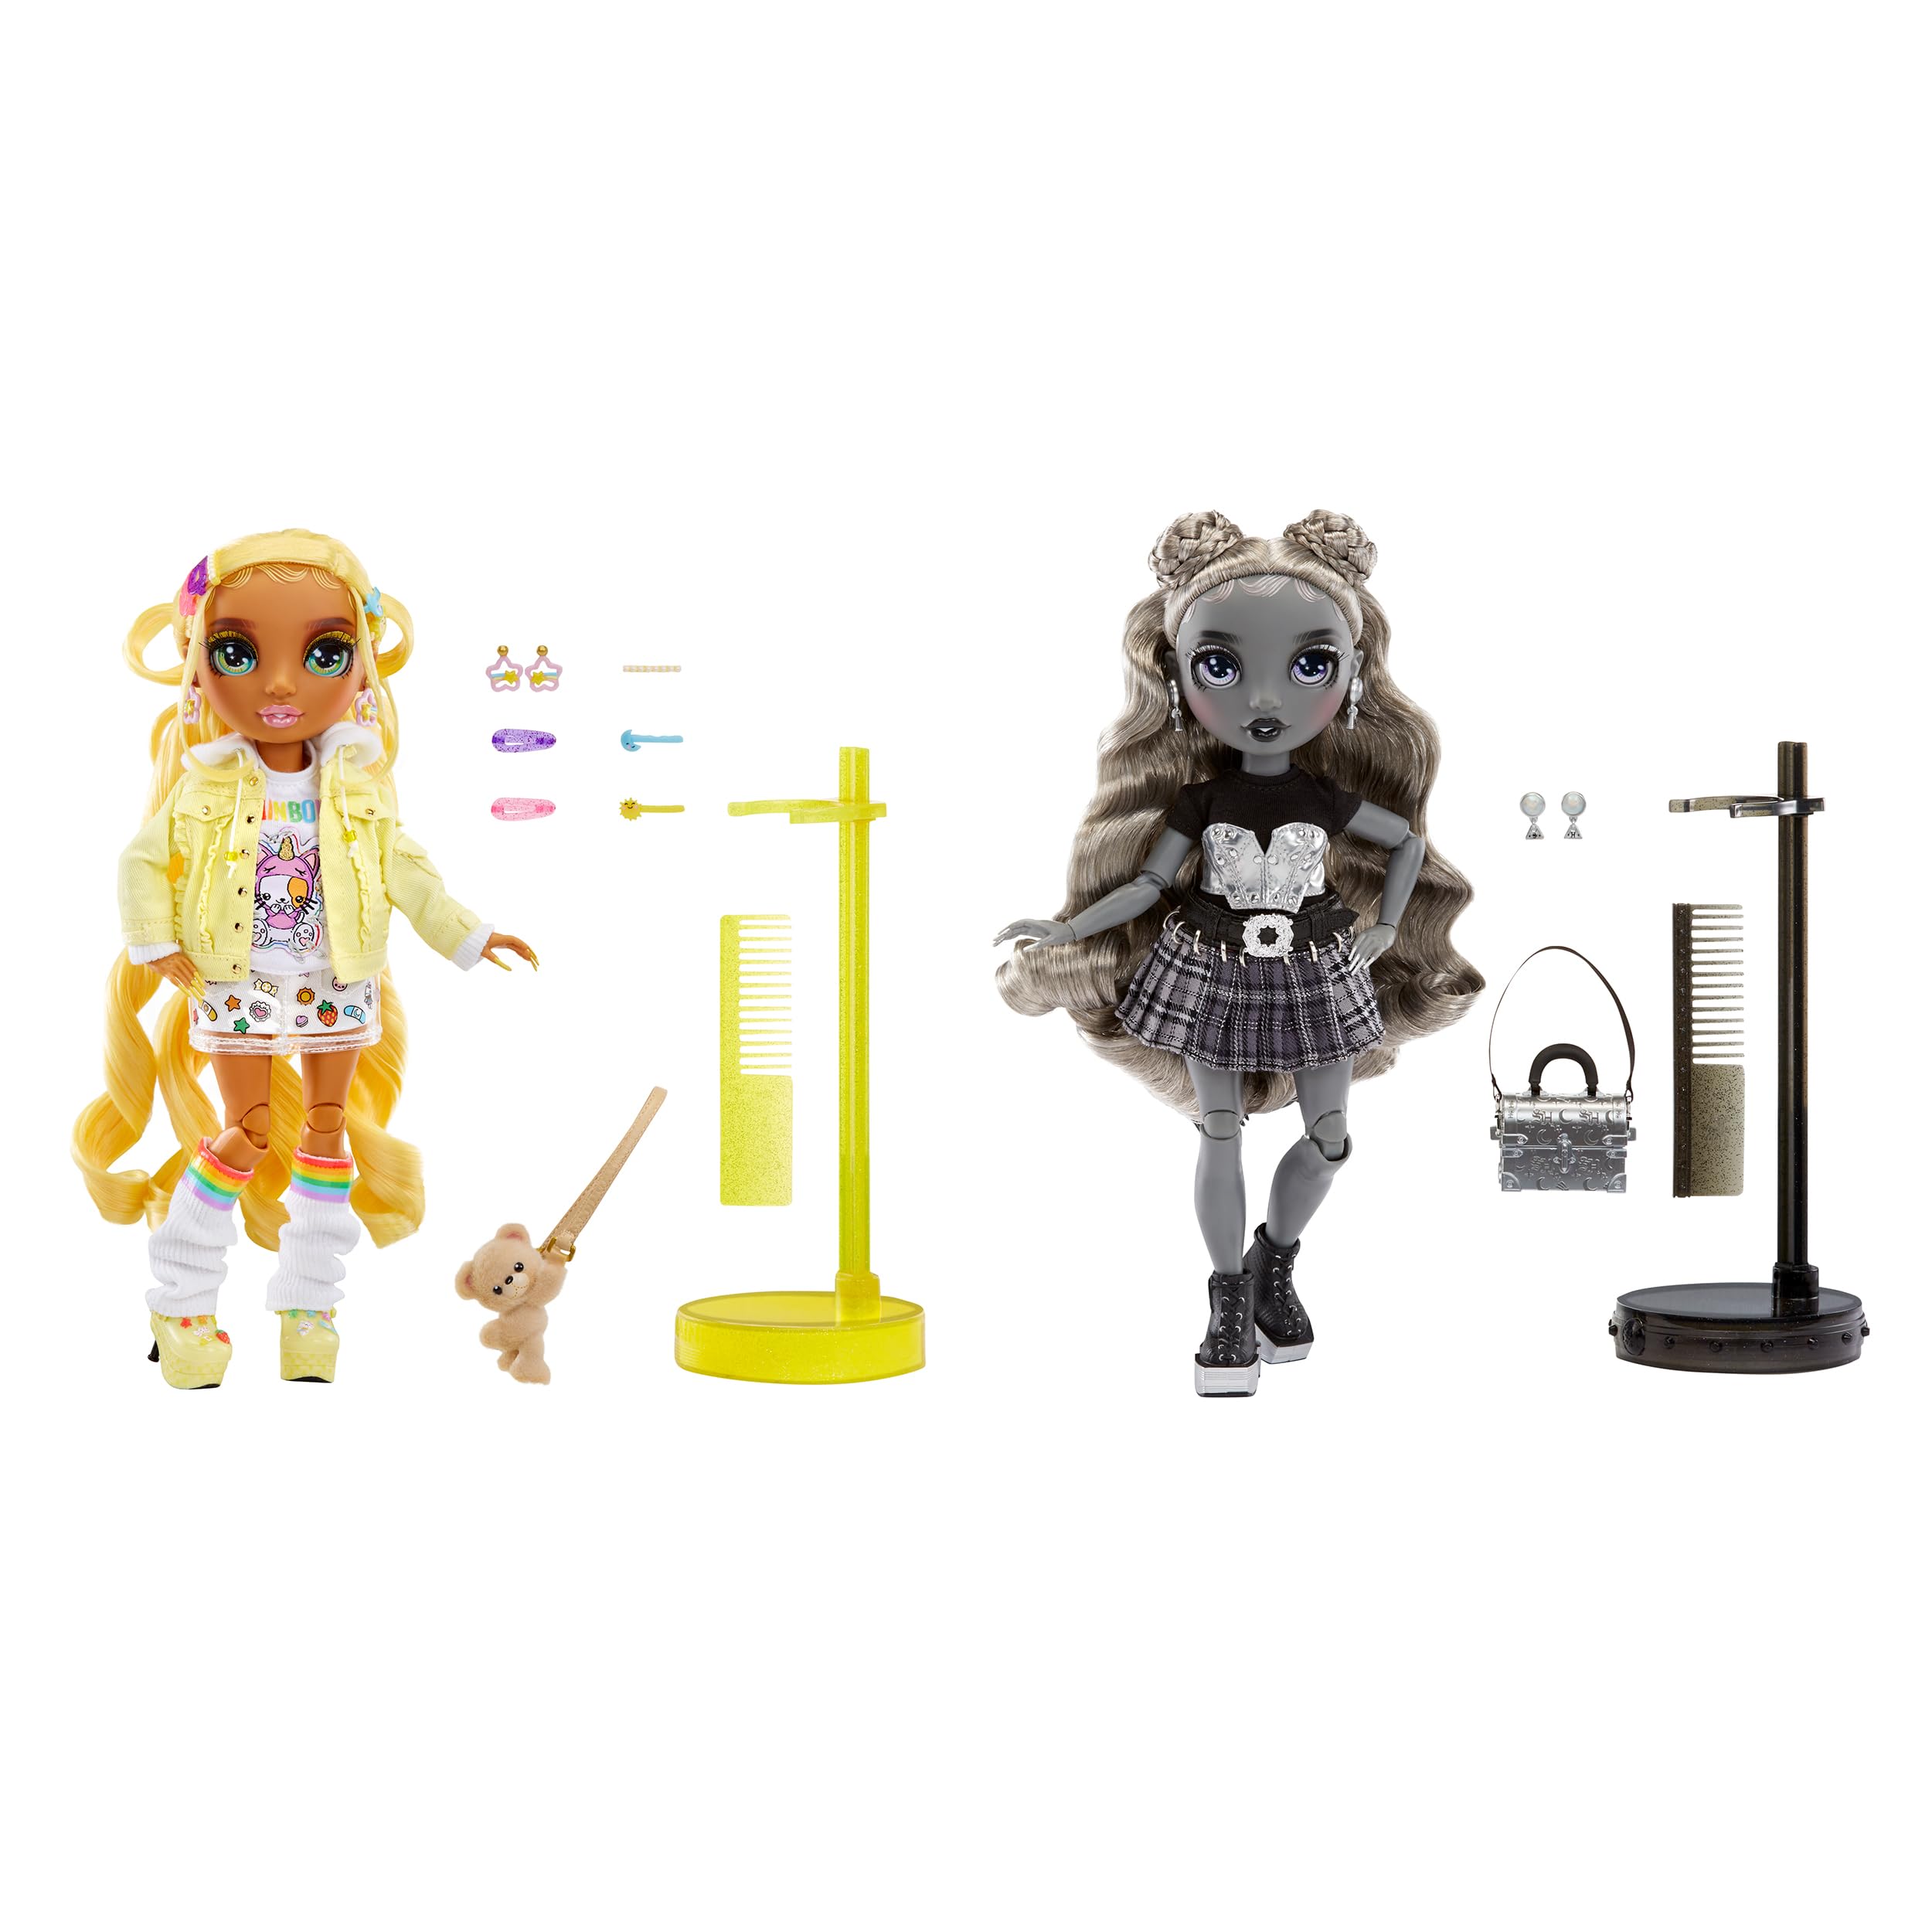 Rainbow High Shadow High Special Edition Madison Twins- 2-Pack Fashion Doll. Yellow & Grey Designer Outfits with Accessories, Mix and Match Outfits, Great Gift for Kids 4-12 Years Old & Collectors